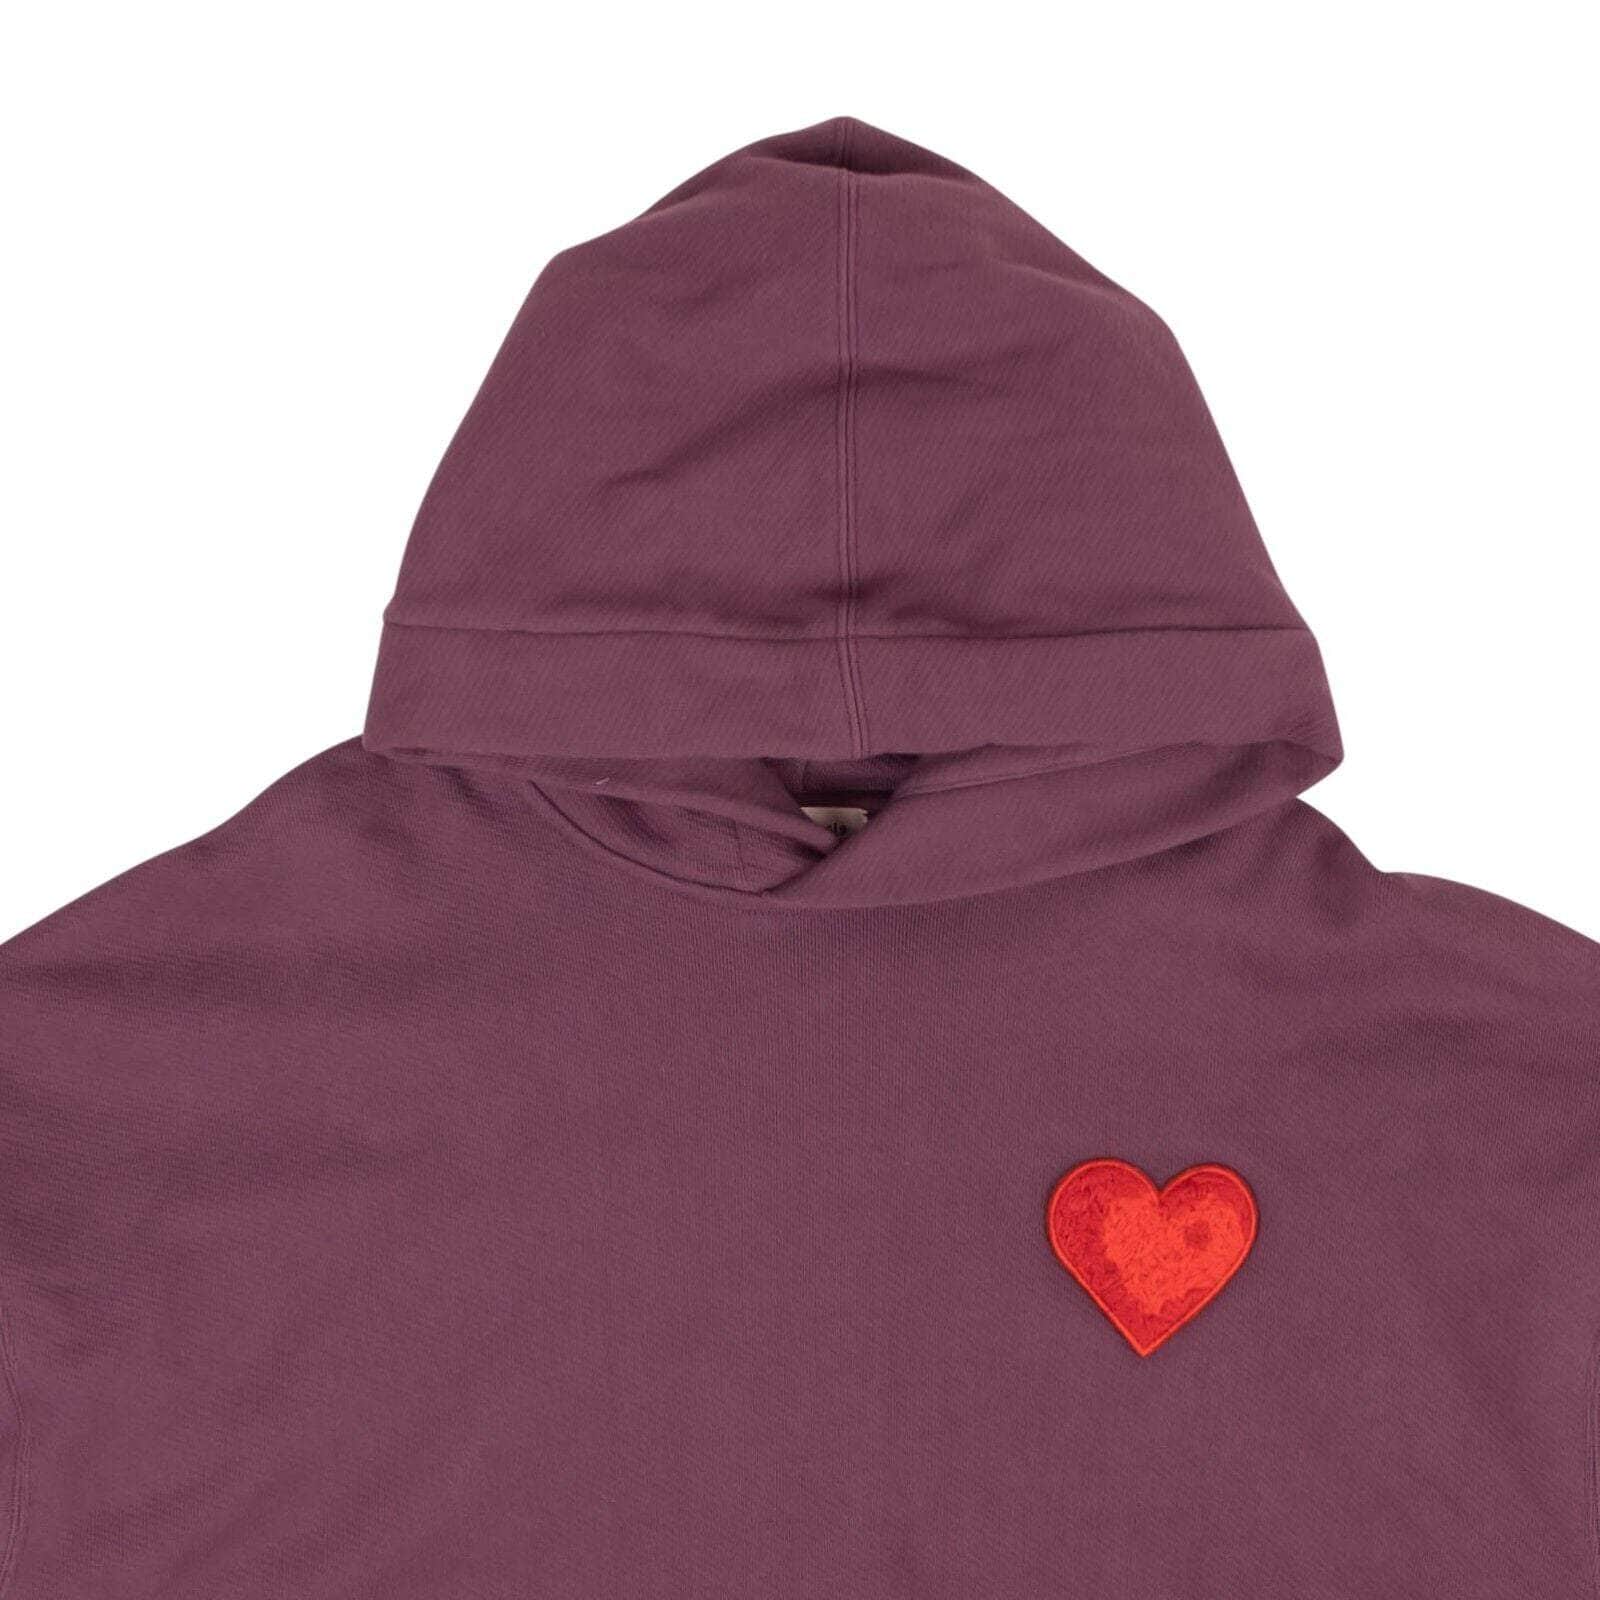 Palm Angels 750-1000, channelenable-all, chicmi, couponcollection, gender-mens, main-clothing, mens-shoes, palm-angels, size-m M Purple And Denim Horizontal Zipper Hoodie 82NGG-PA-1197/M 82NGG-PA-1197/M